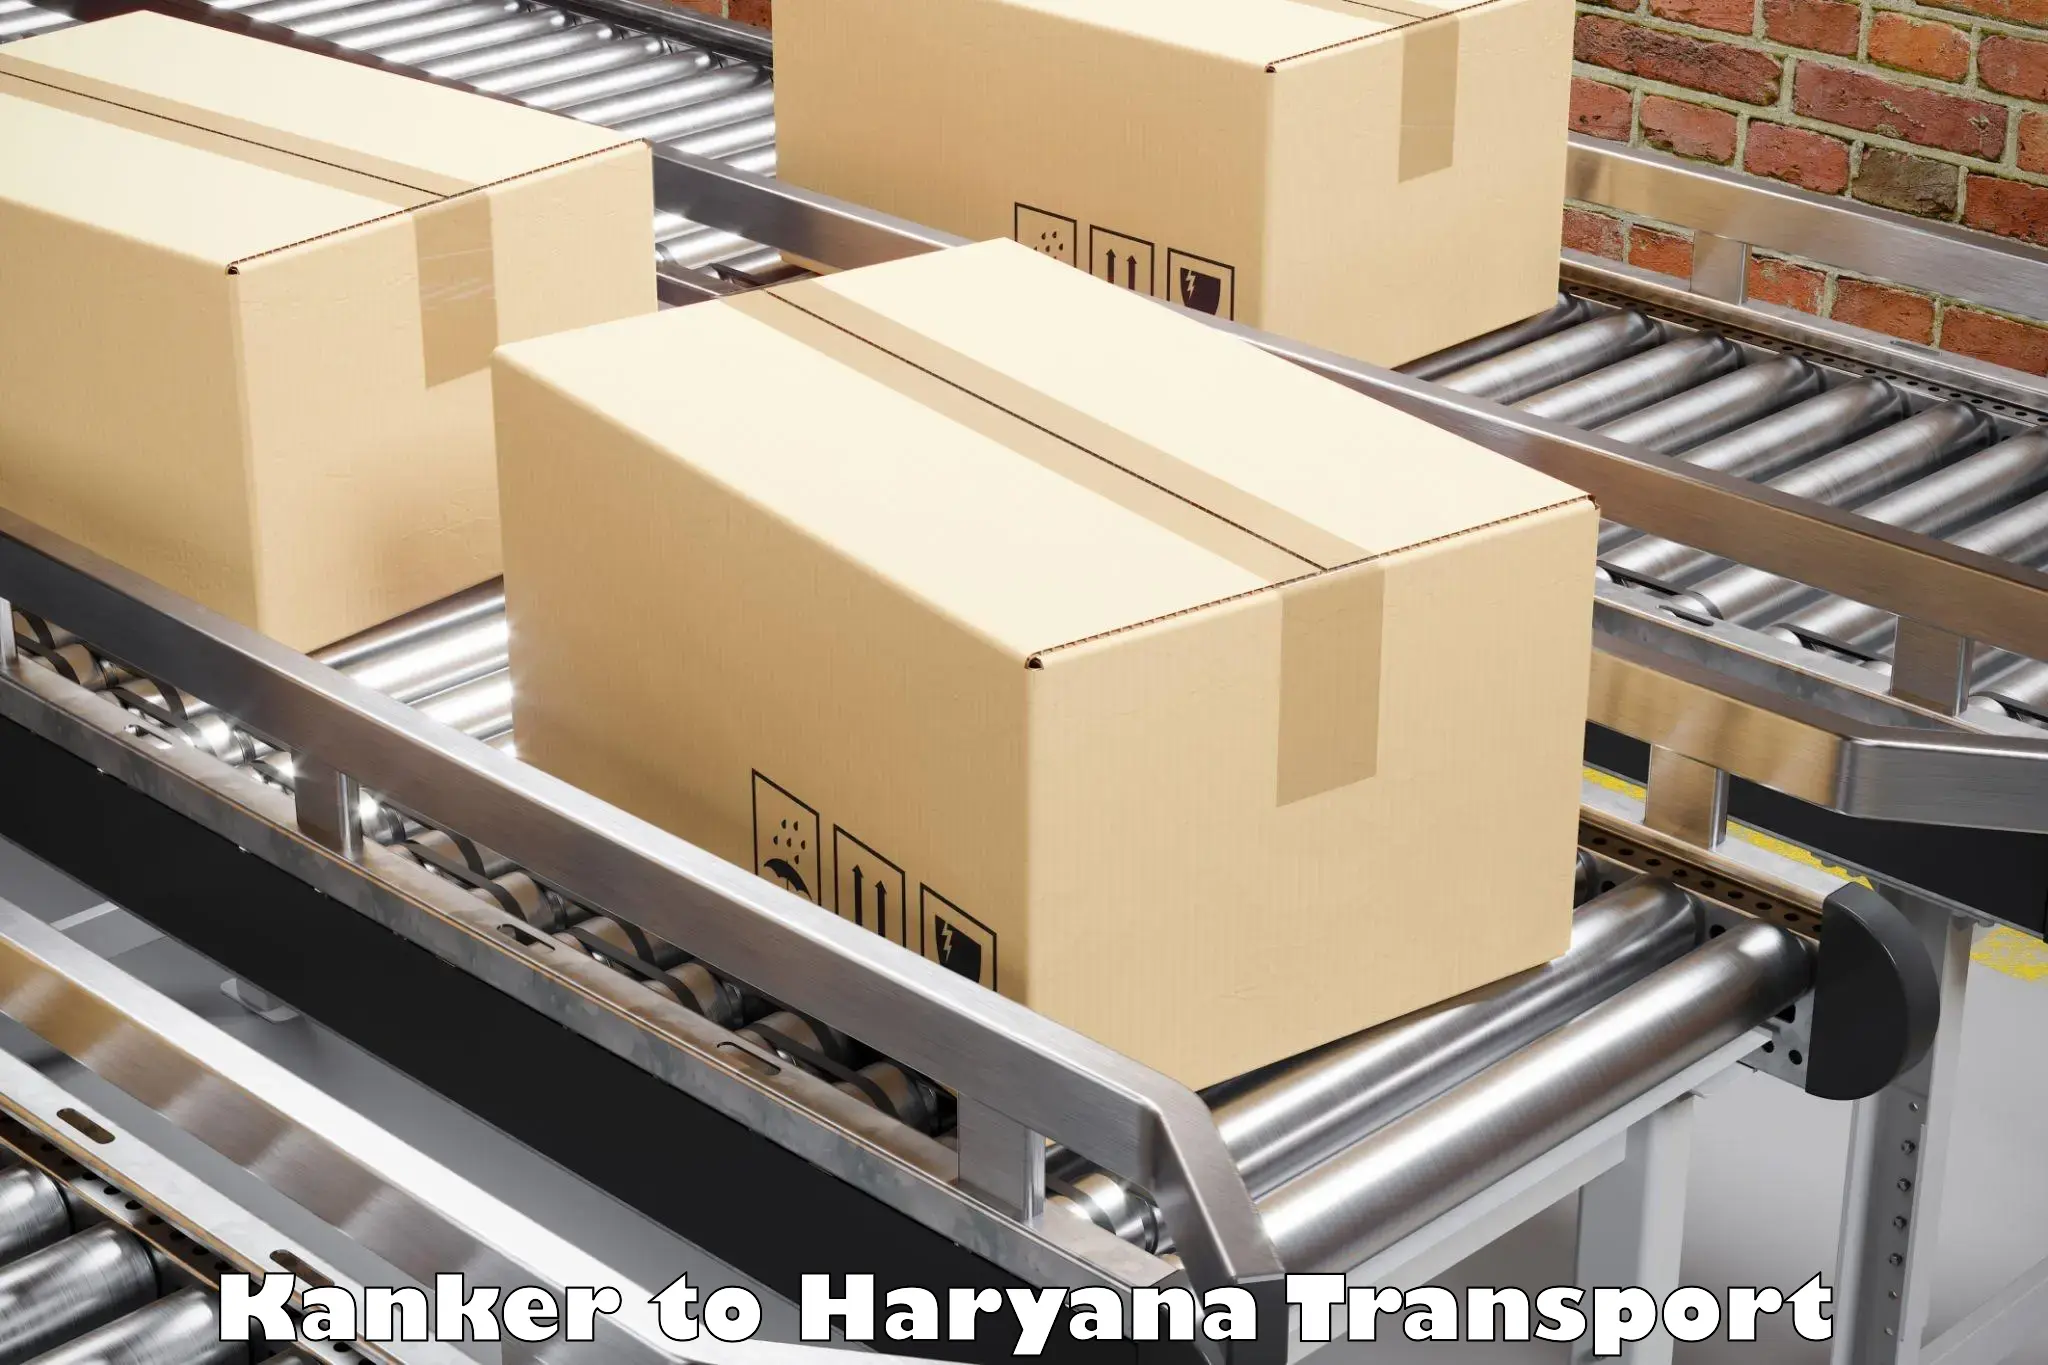 Truck transport companies in India Kanker to Chirya